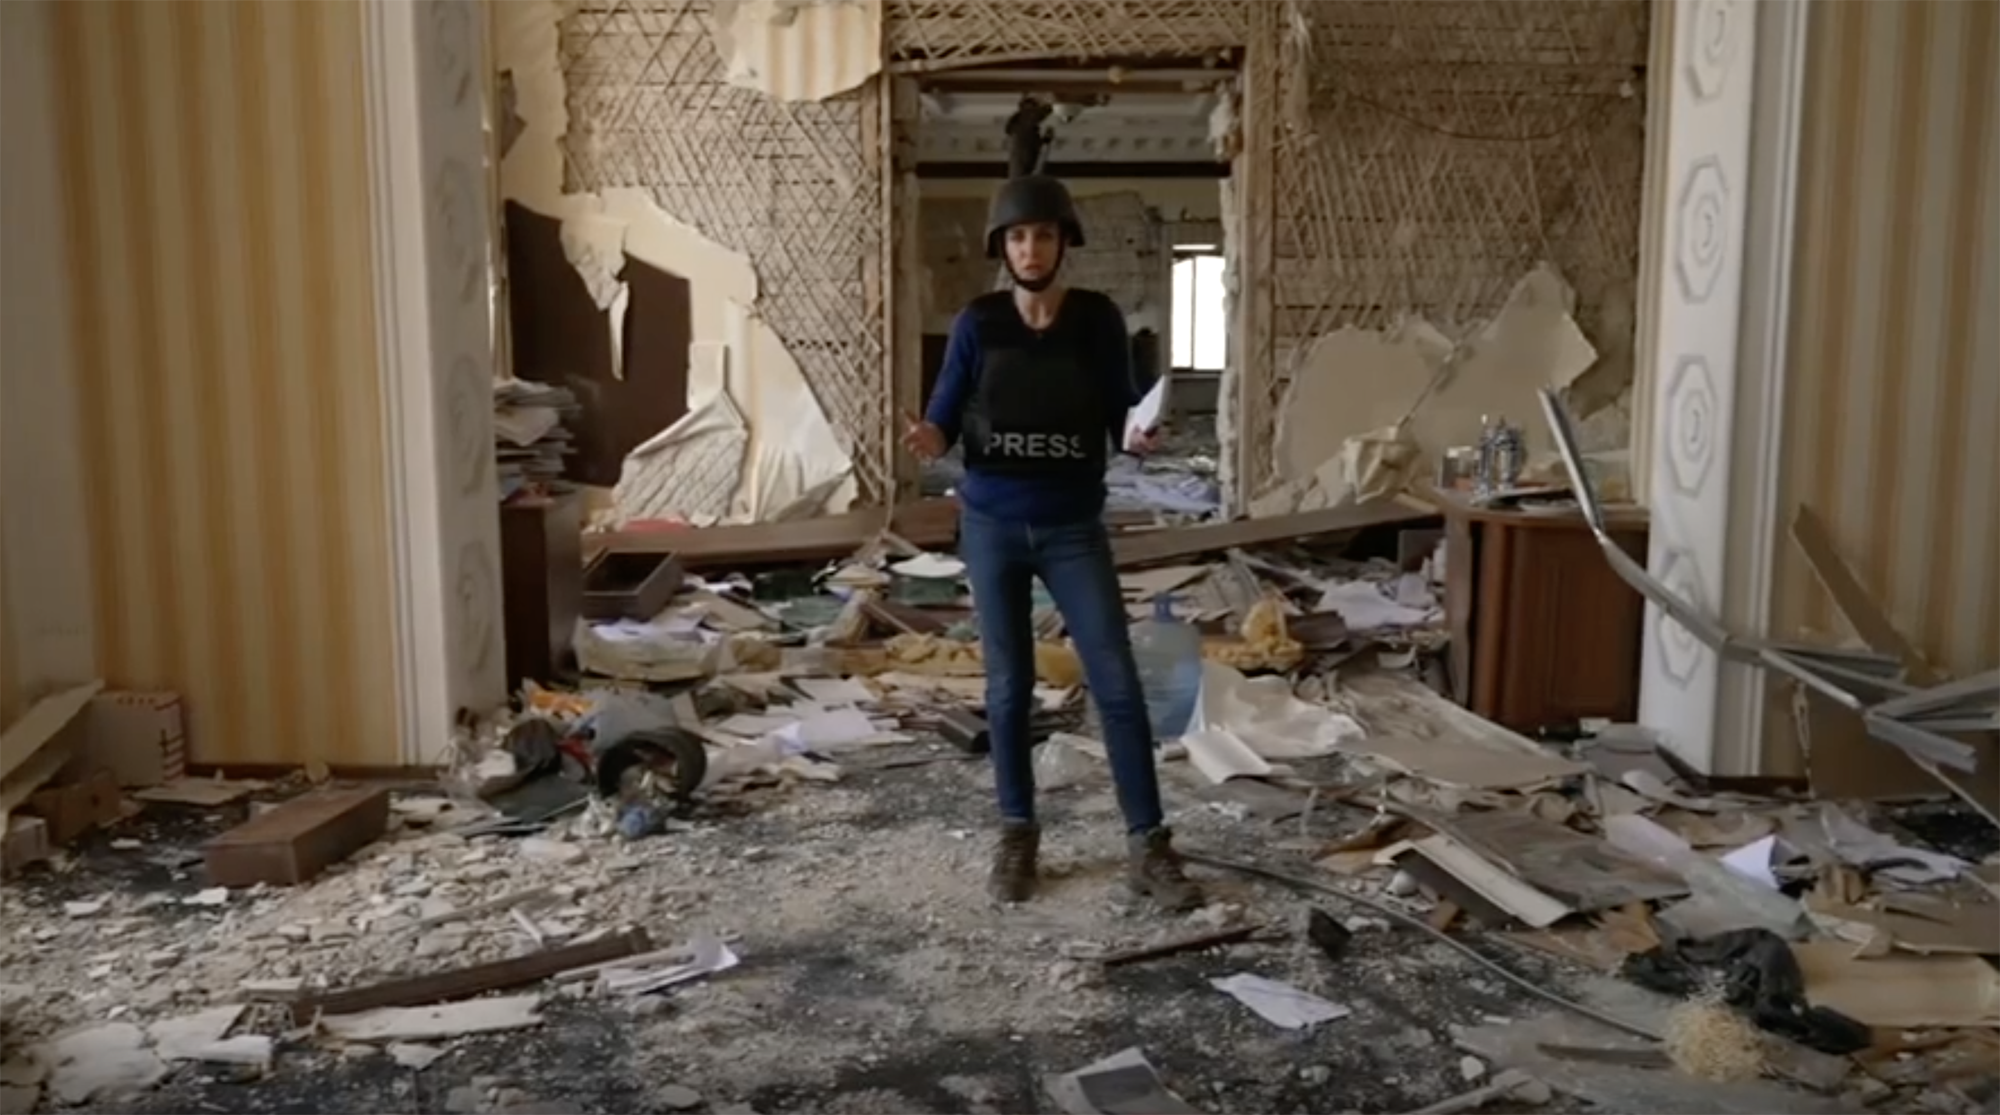 CNN's Clarissa Ward reports from the destroyed regional state administration building in Kharkiv as Russian forces continue to attack Ukraine's second-largest city.